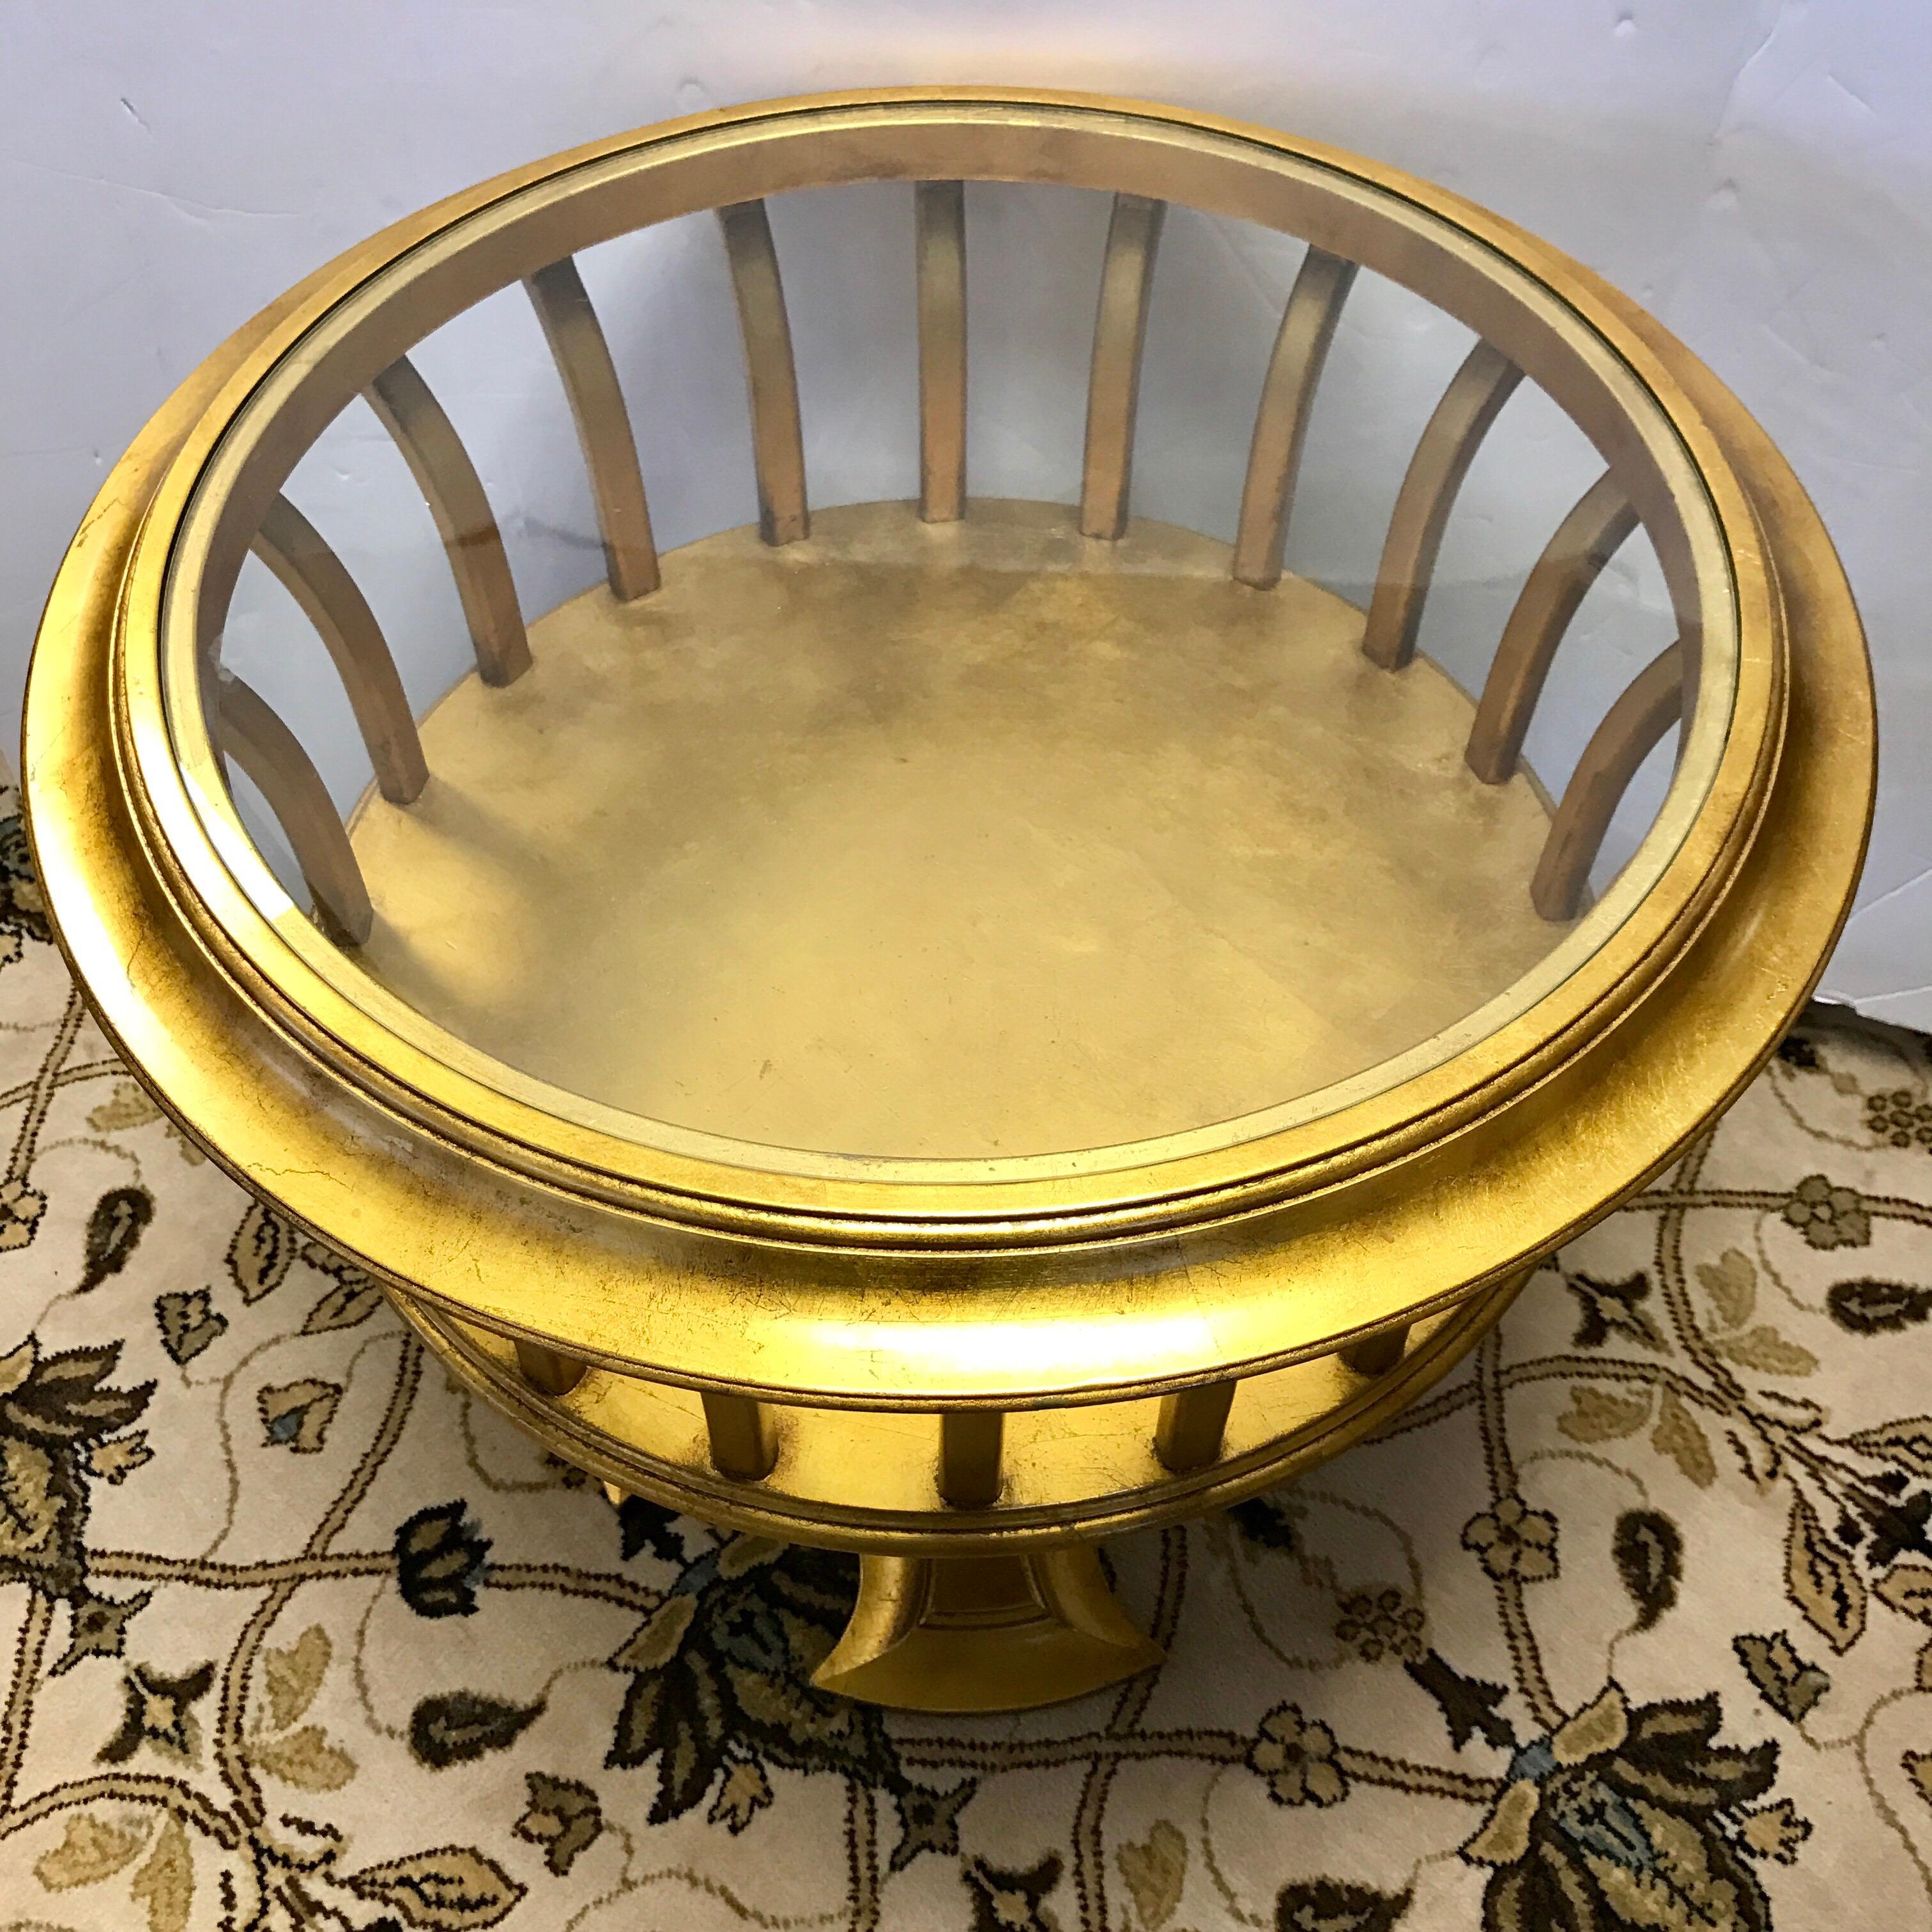 Round giltwood and glass table has a cage design. Display or store items inside the slatted sides. Glass top pops off if needed.